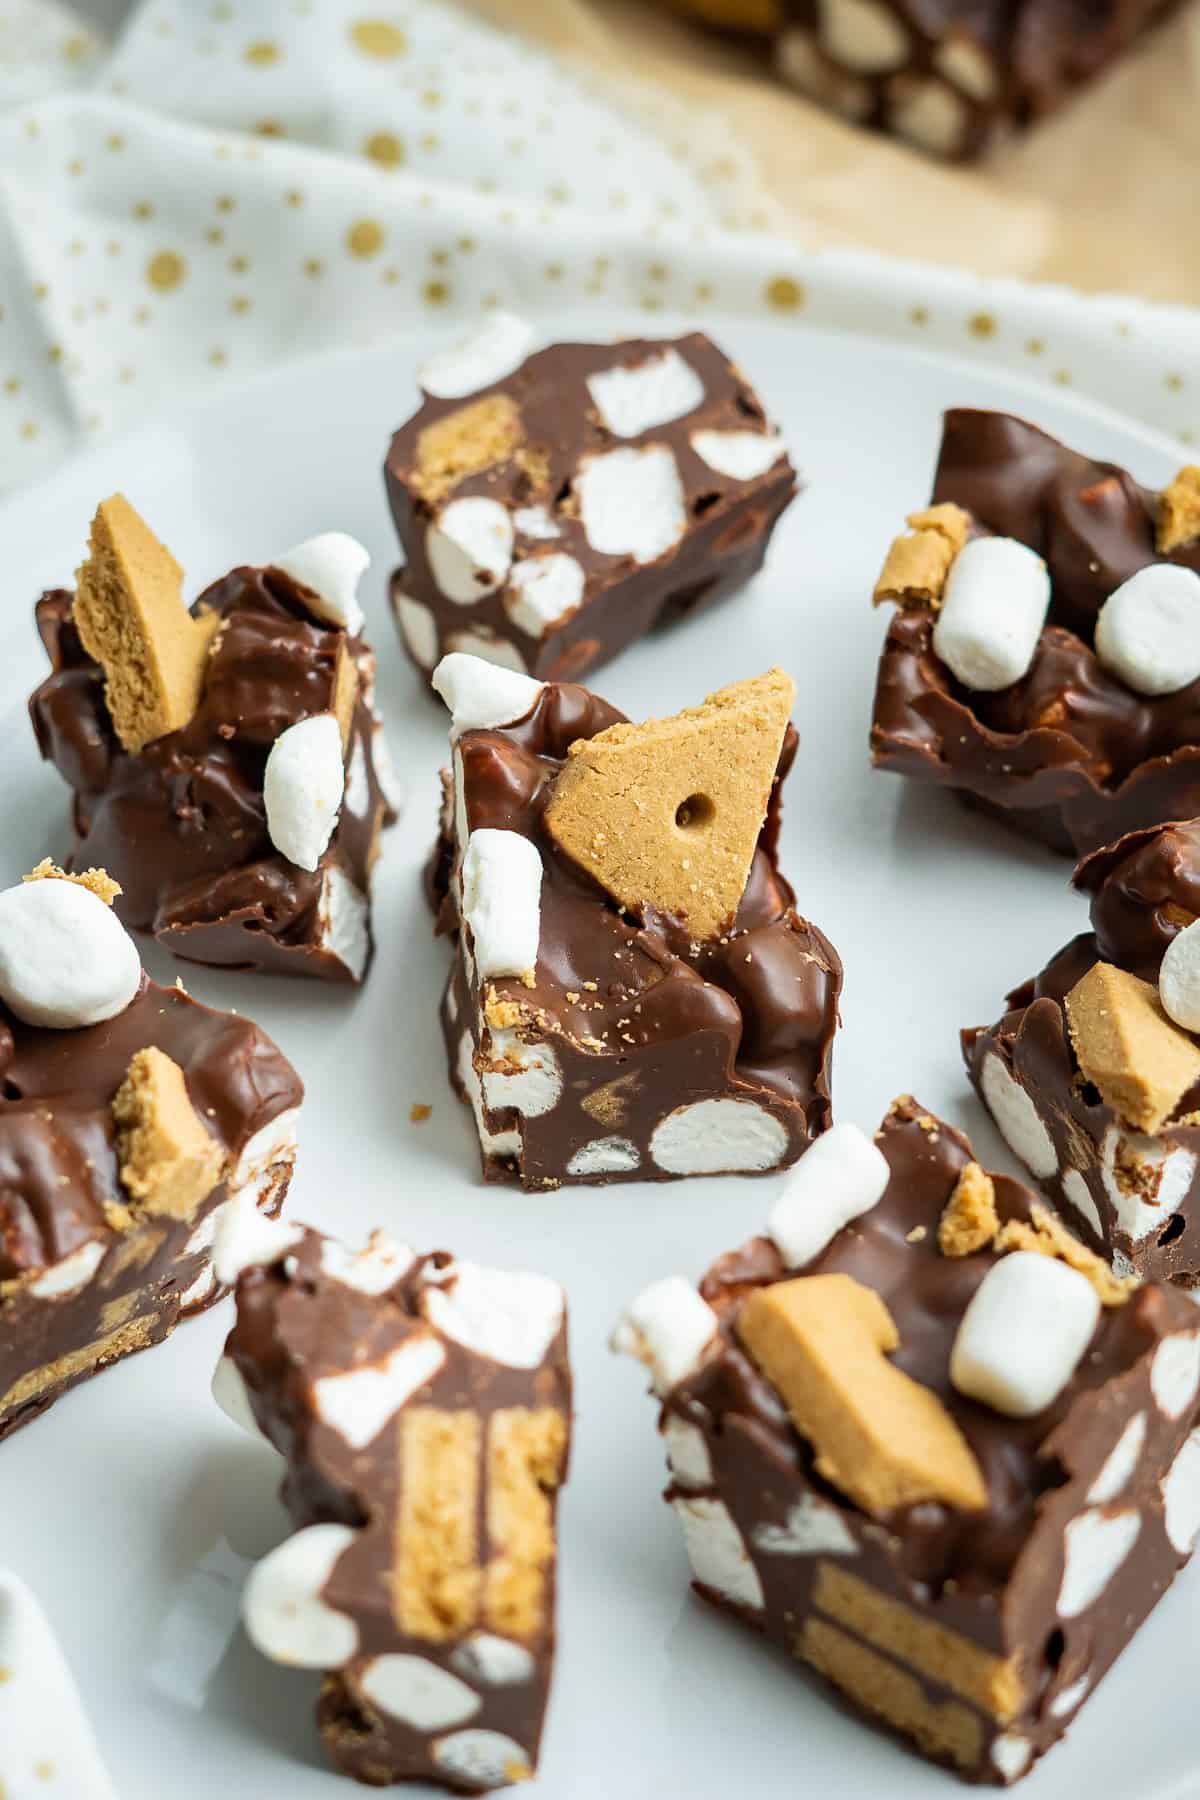 A plate of pieces of S'mores Rocky Road arranged for serving.